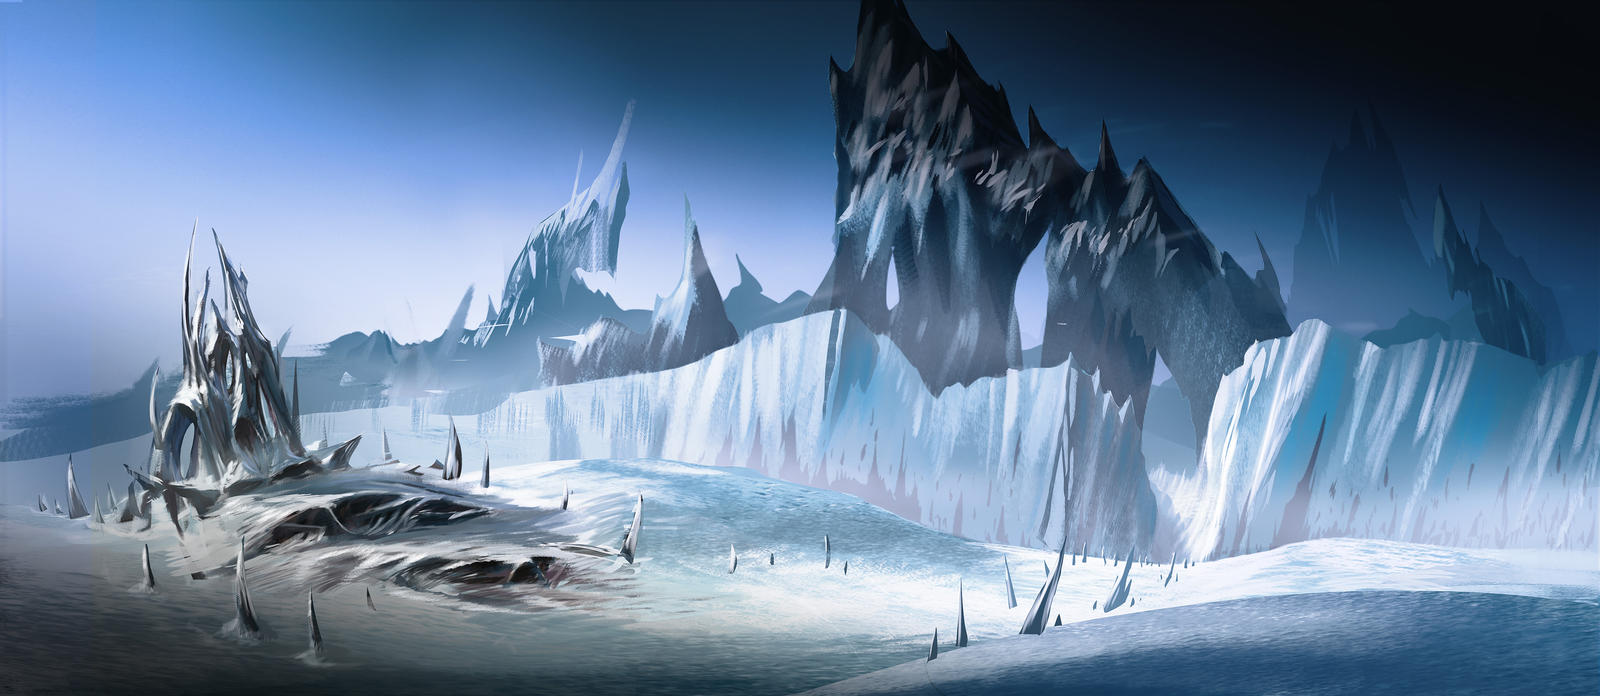 ice_planet_hive_by_meckanicalmind_d5xuuid-fullview.jpg